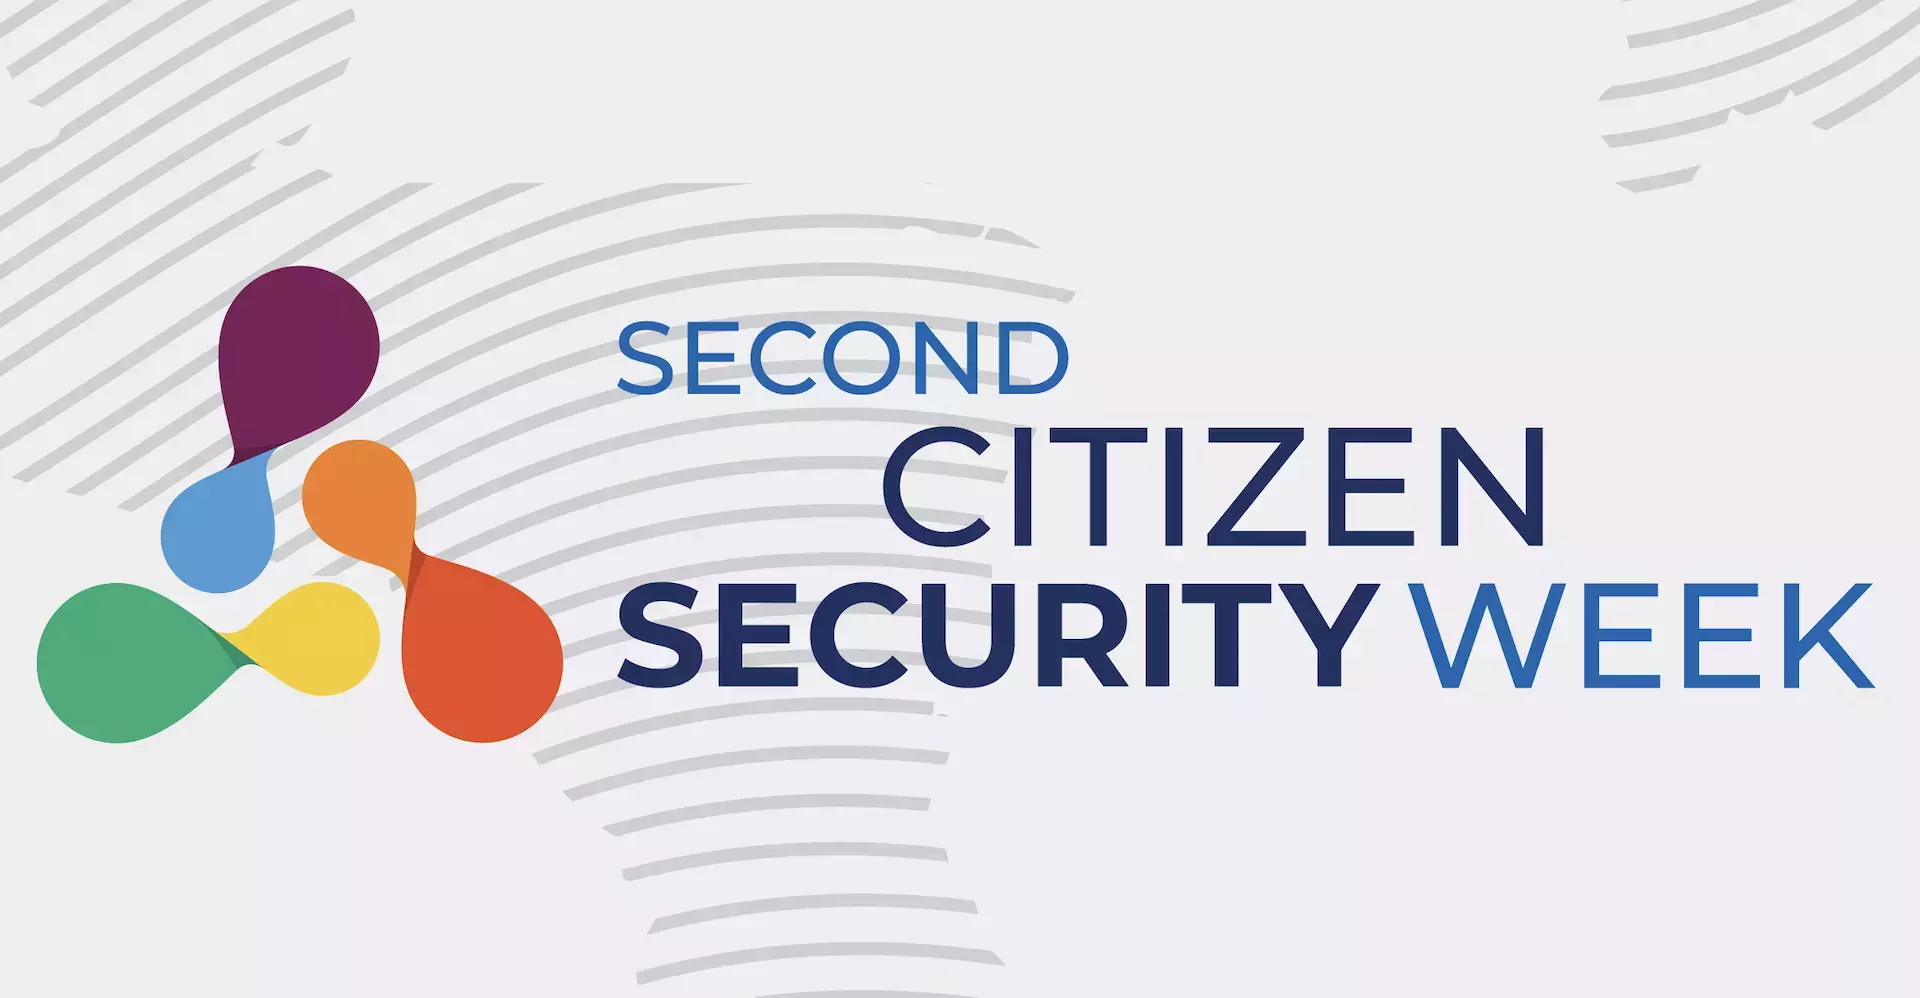 Second Security Week Overview